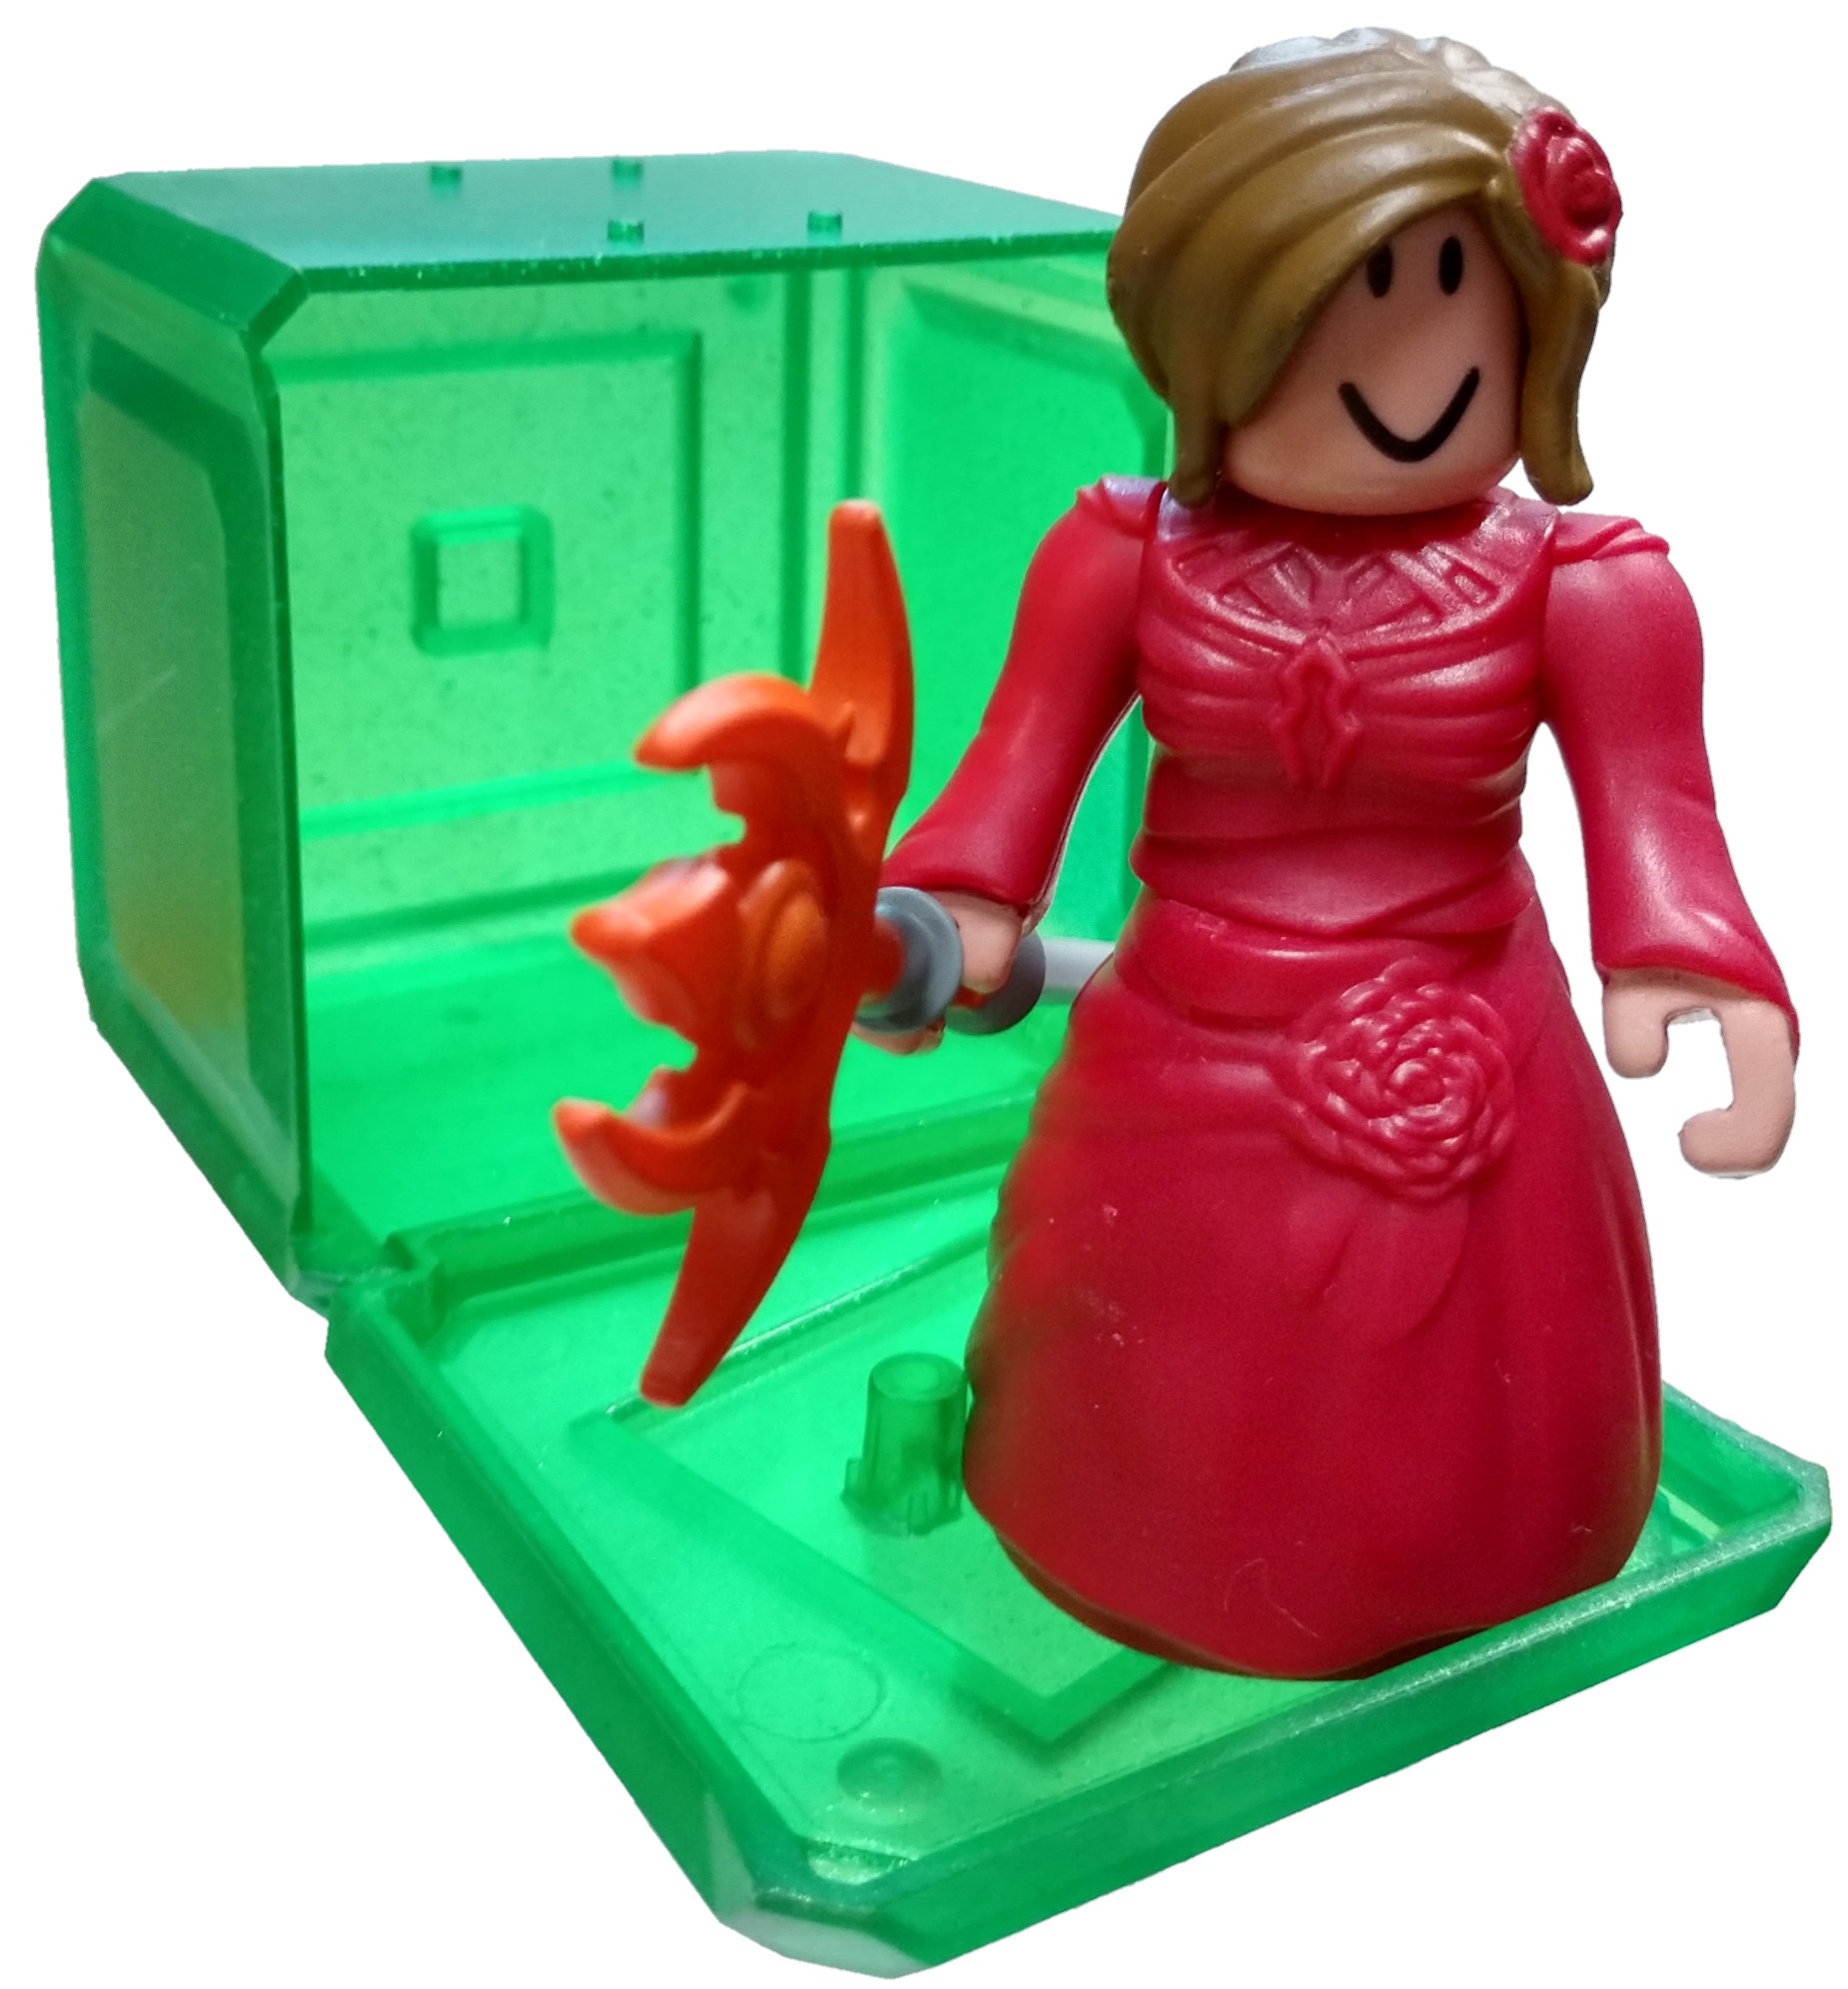 Roblox Celebrity Collection Series 4 Scarlet Sorceress Mini Figure 609411421680 Ebay - roblox enchanted academy 3 action figure 2 pack jazwares toywiz